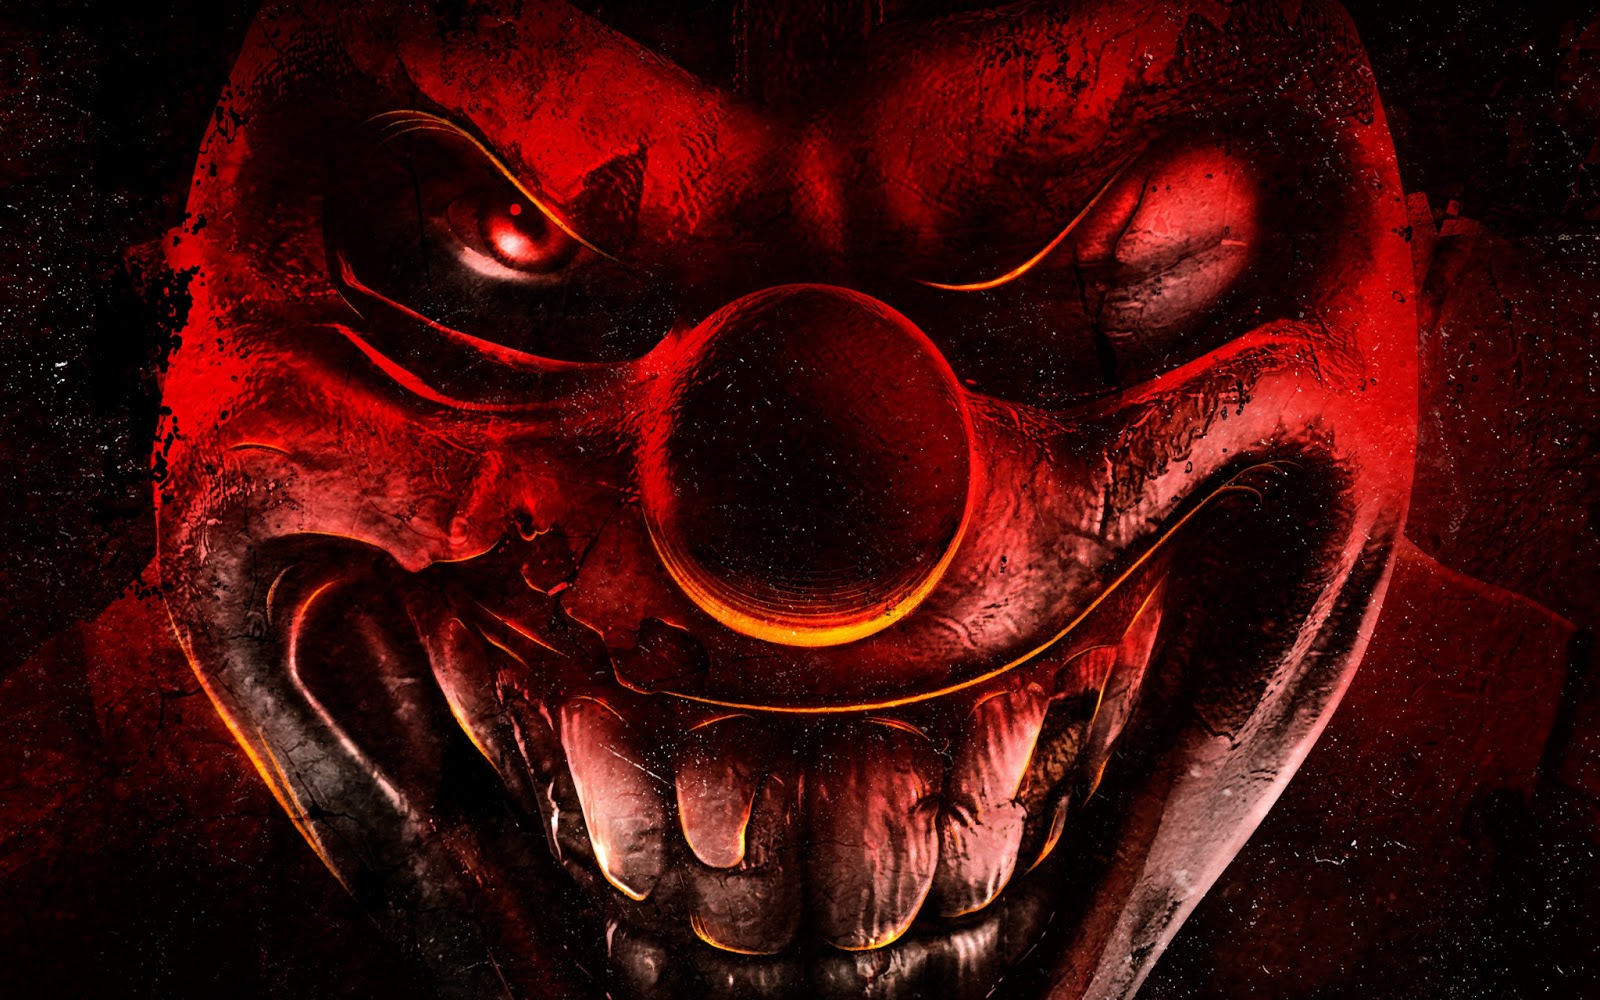 Scary HD Wallpaper Check Out The Cool